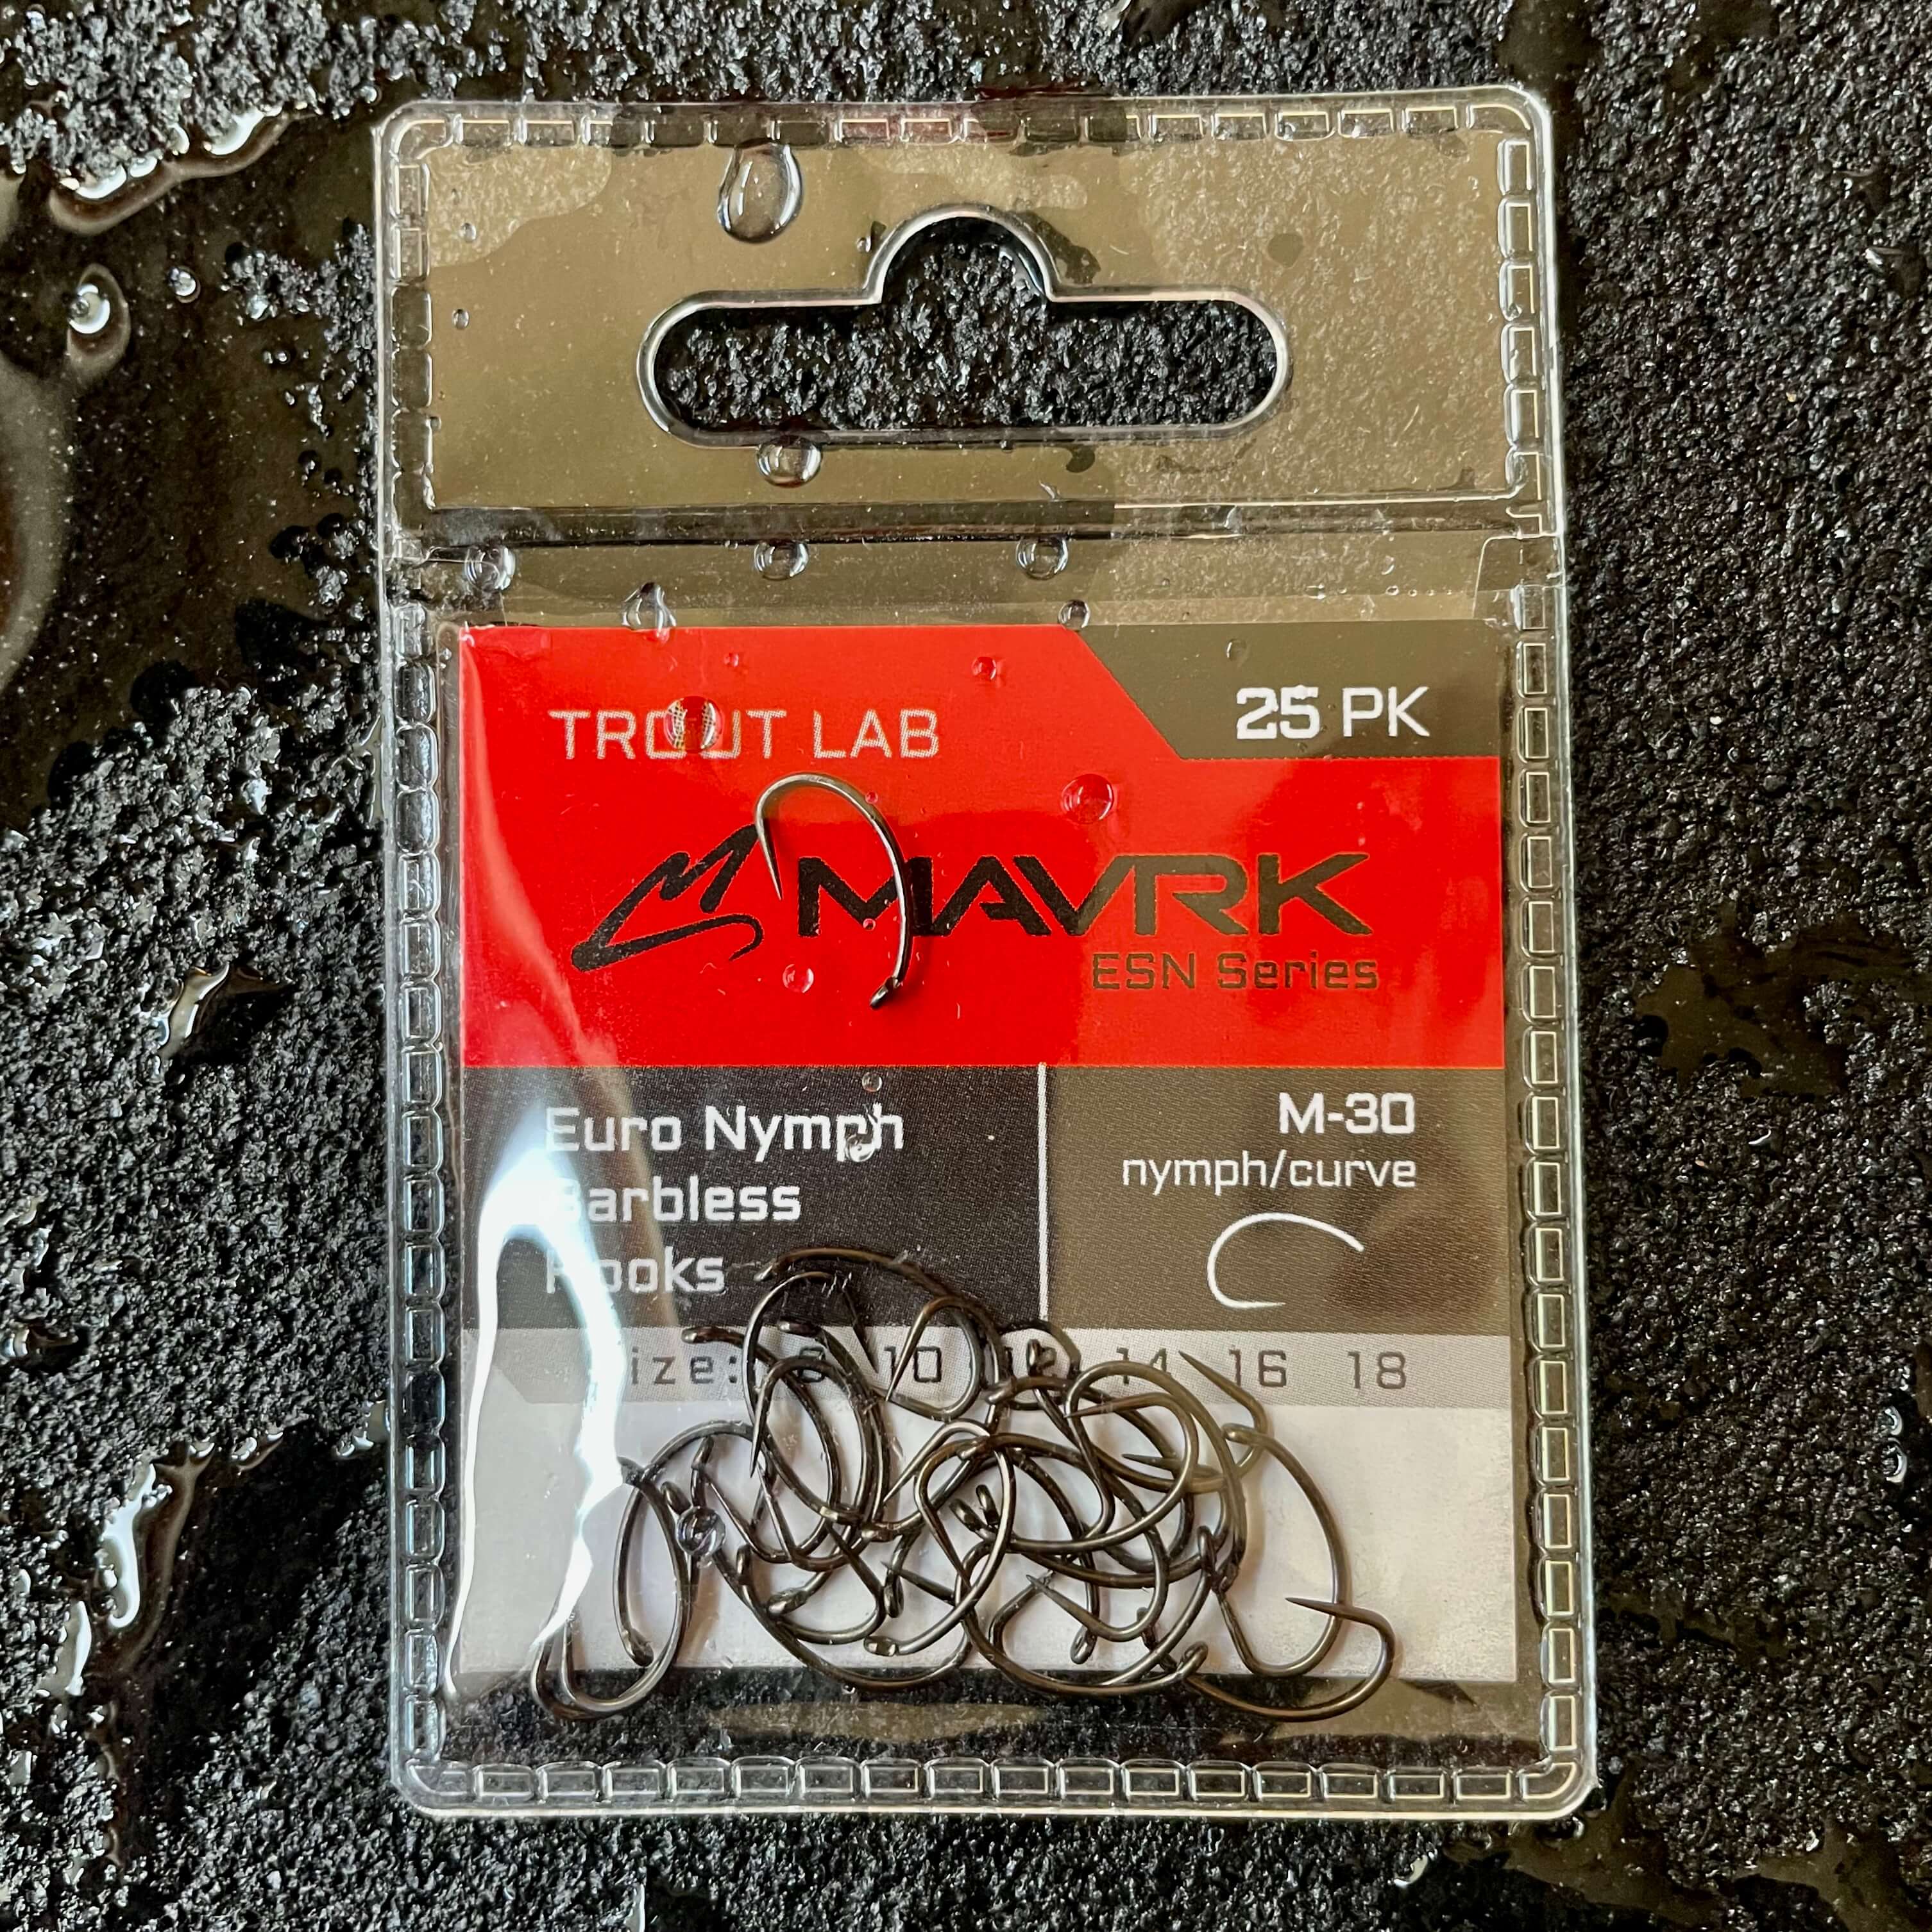 Euro Nymph Barbless Hooks (25 PC Refill Packs) M30 Curve Hook / 16